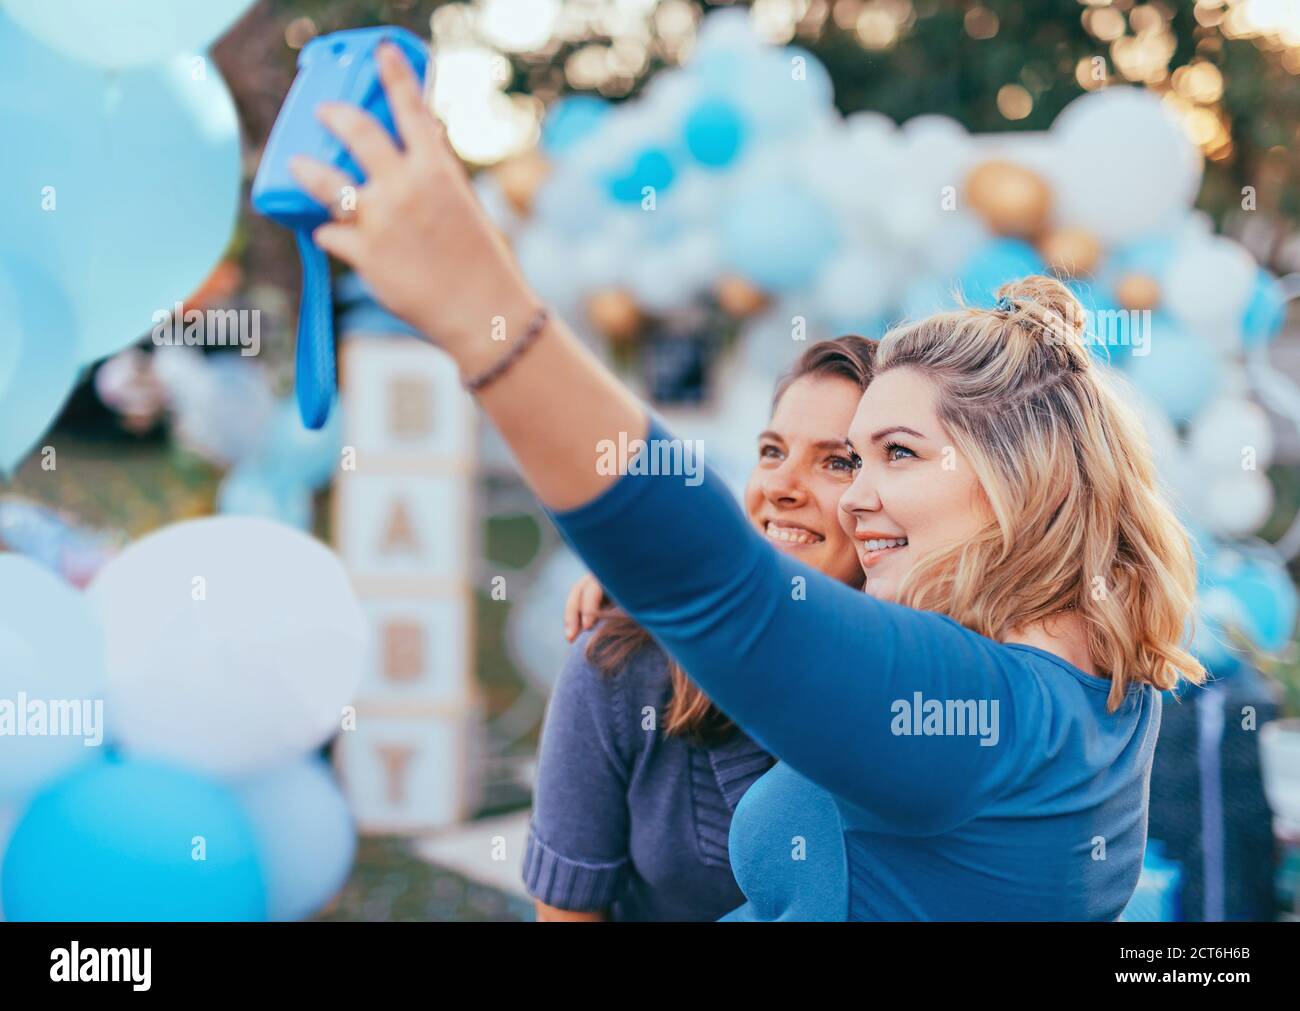 Female friends taking selfie with pregnant woman at a baby shower. Mobile photography, party decorations in white and blue colors, baby boy Stock Photo